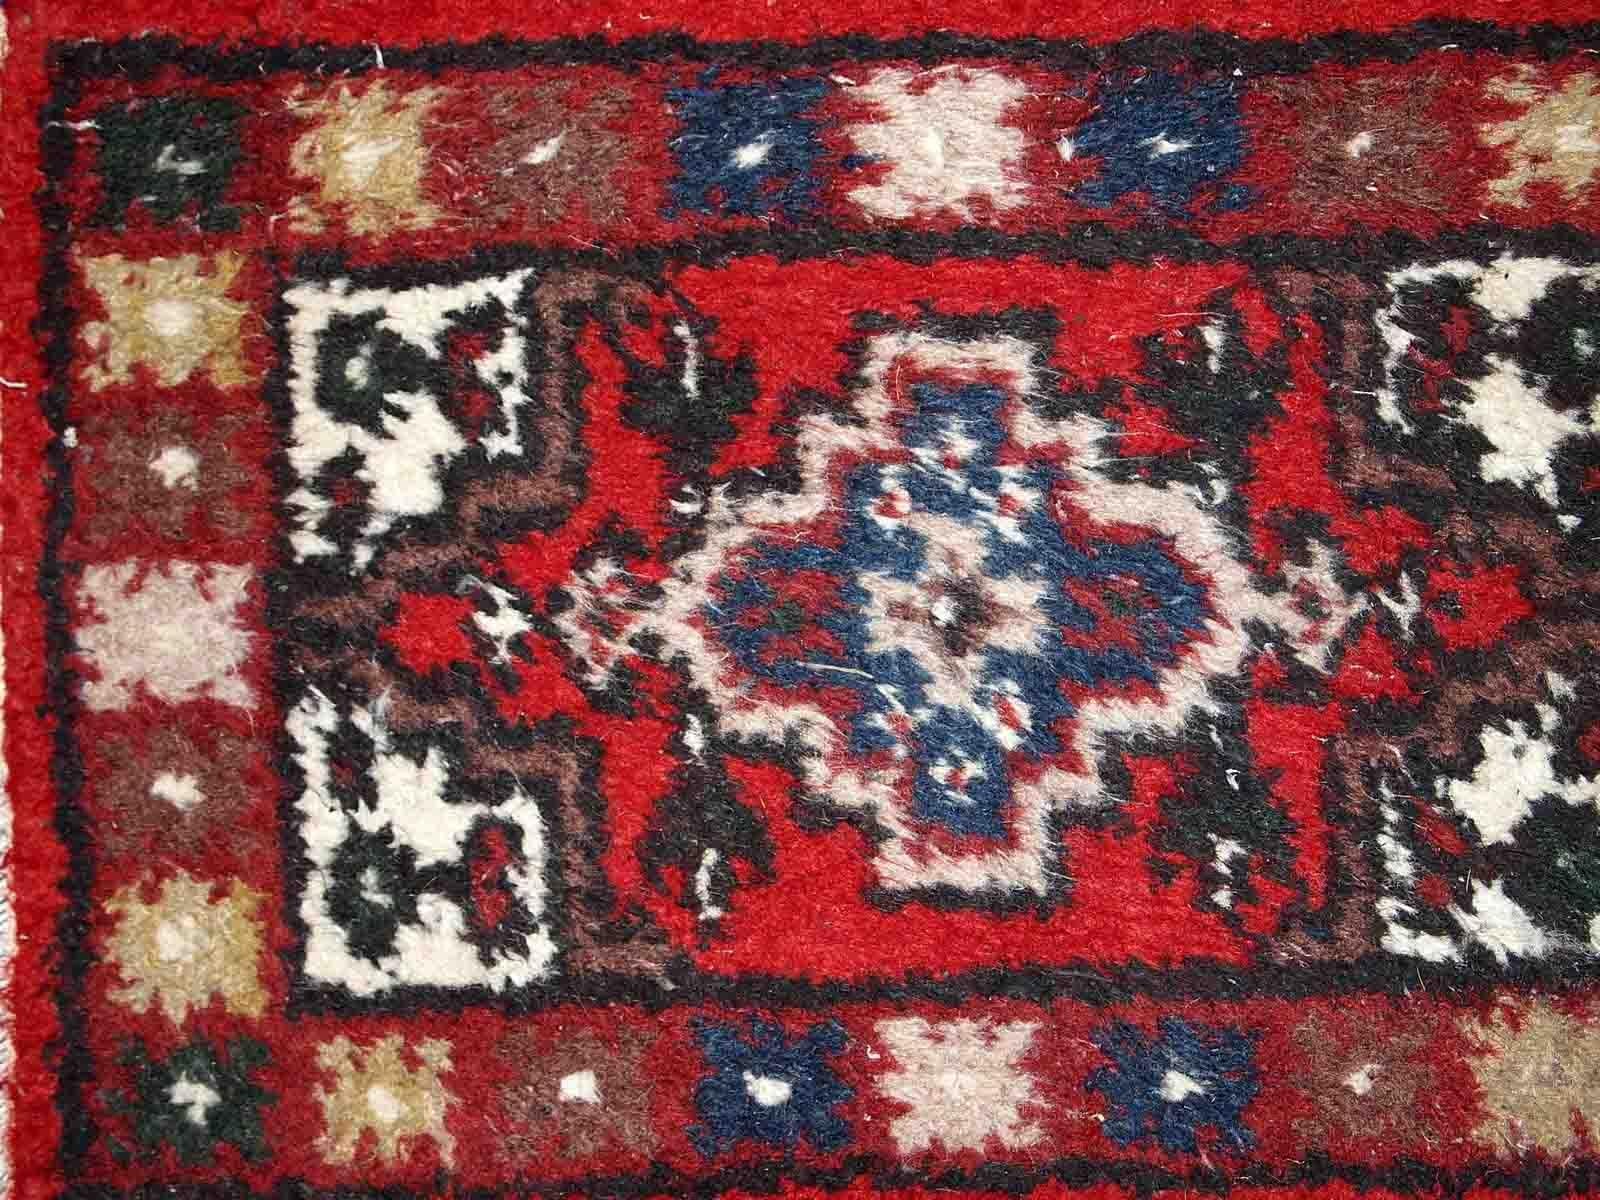 Vintage handmade Middle Eastern mat in original good condition. The rug is from the end of 20th century.

-condition: original good, 

-circa: 1970s,

-size: 1.3' x 1.9' (40cm x 59cm),

-material: wool,

-country of origin: Middle